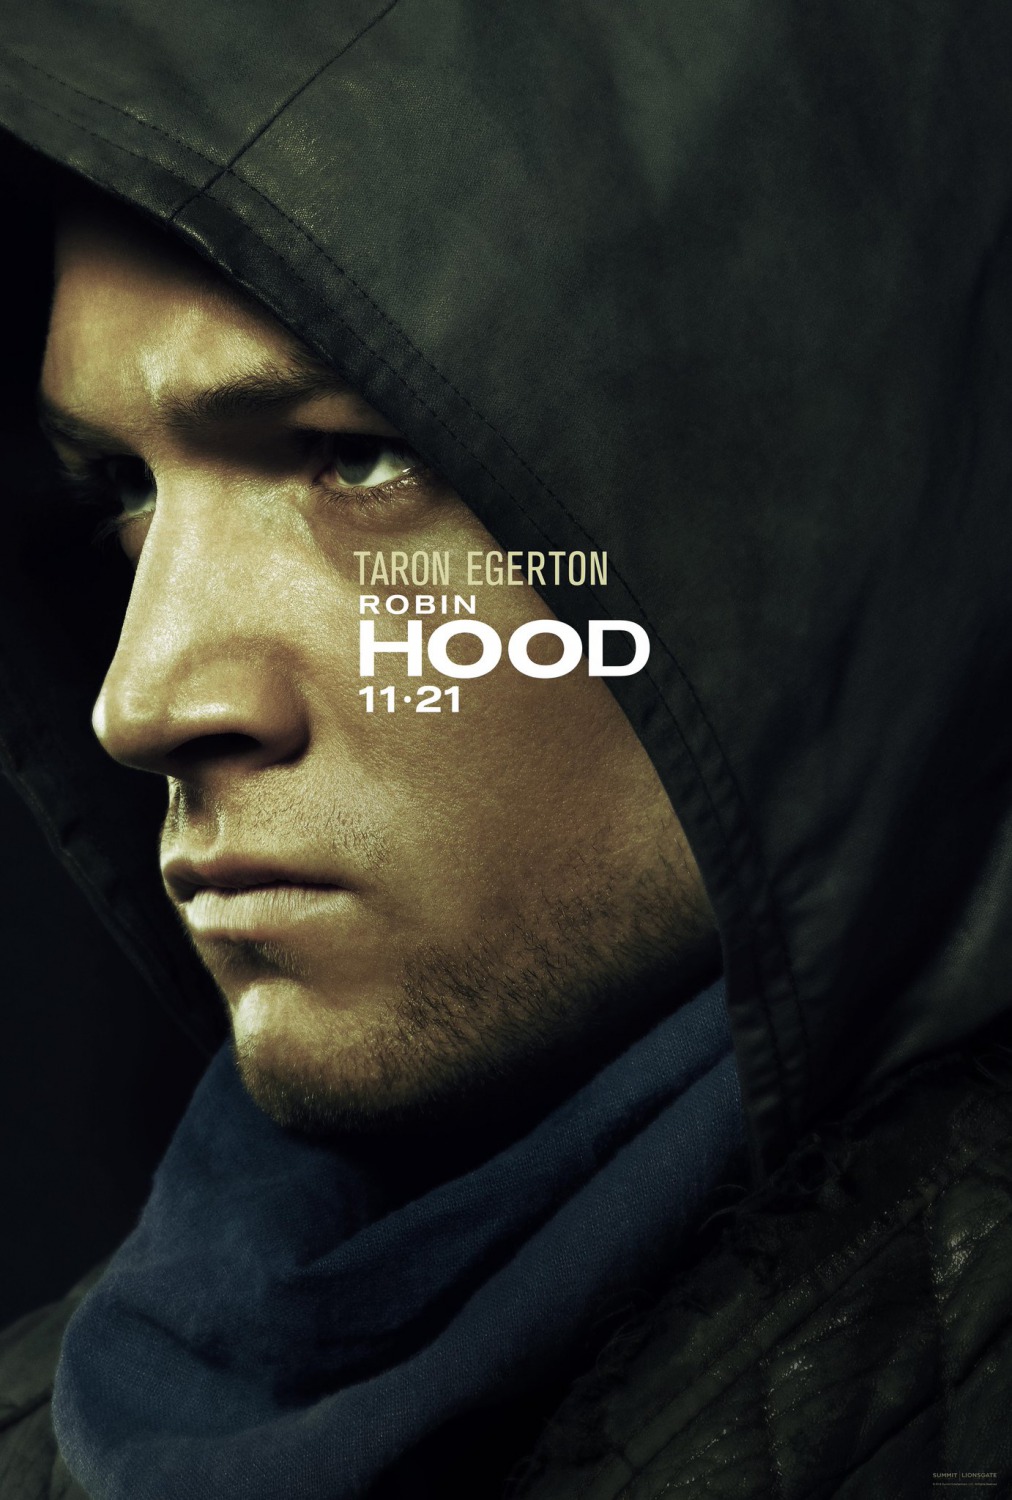 Robin Hood Movie Poster 2018 Wallpapers